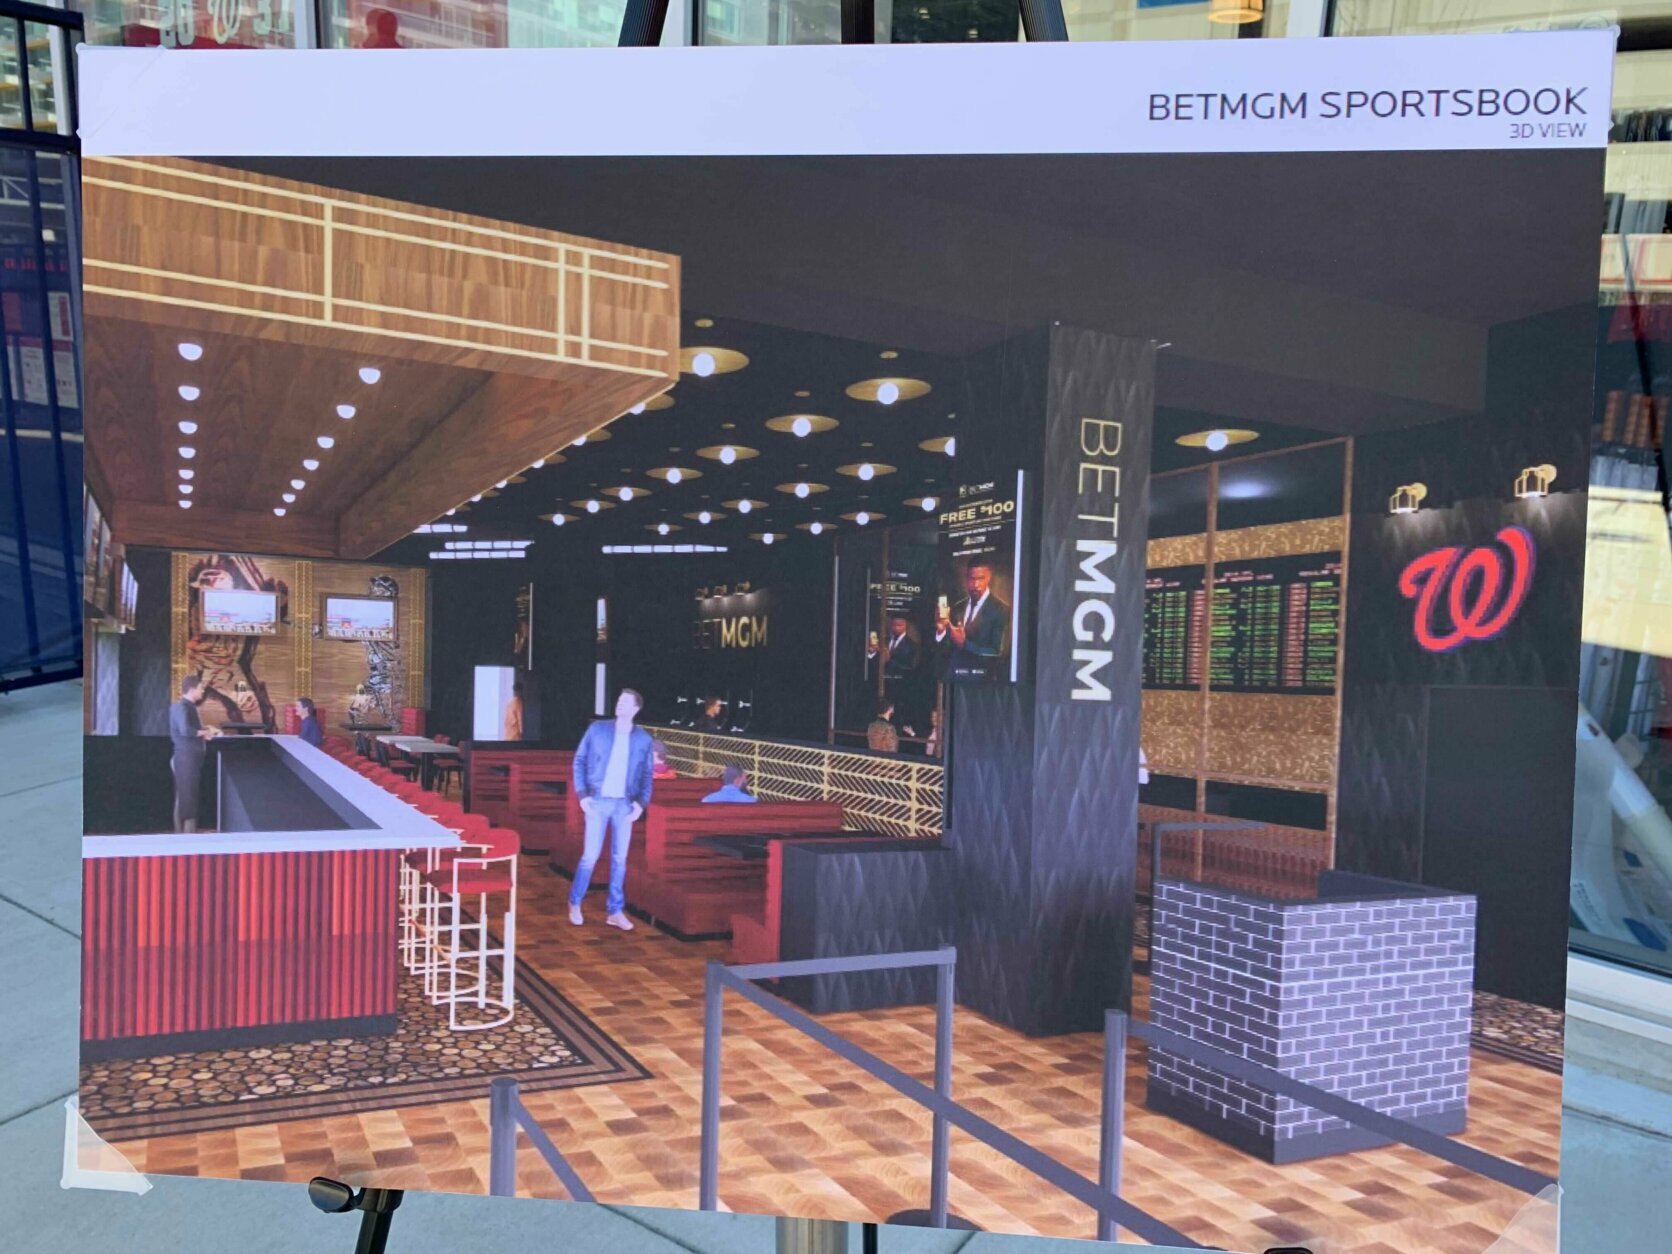 <p>The BET MGM sports betting lounge is expected to open later this year near the Centerfield Gate.</p>
